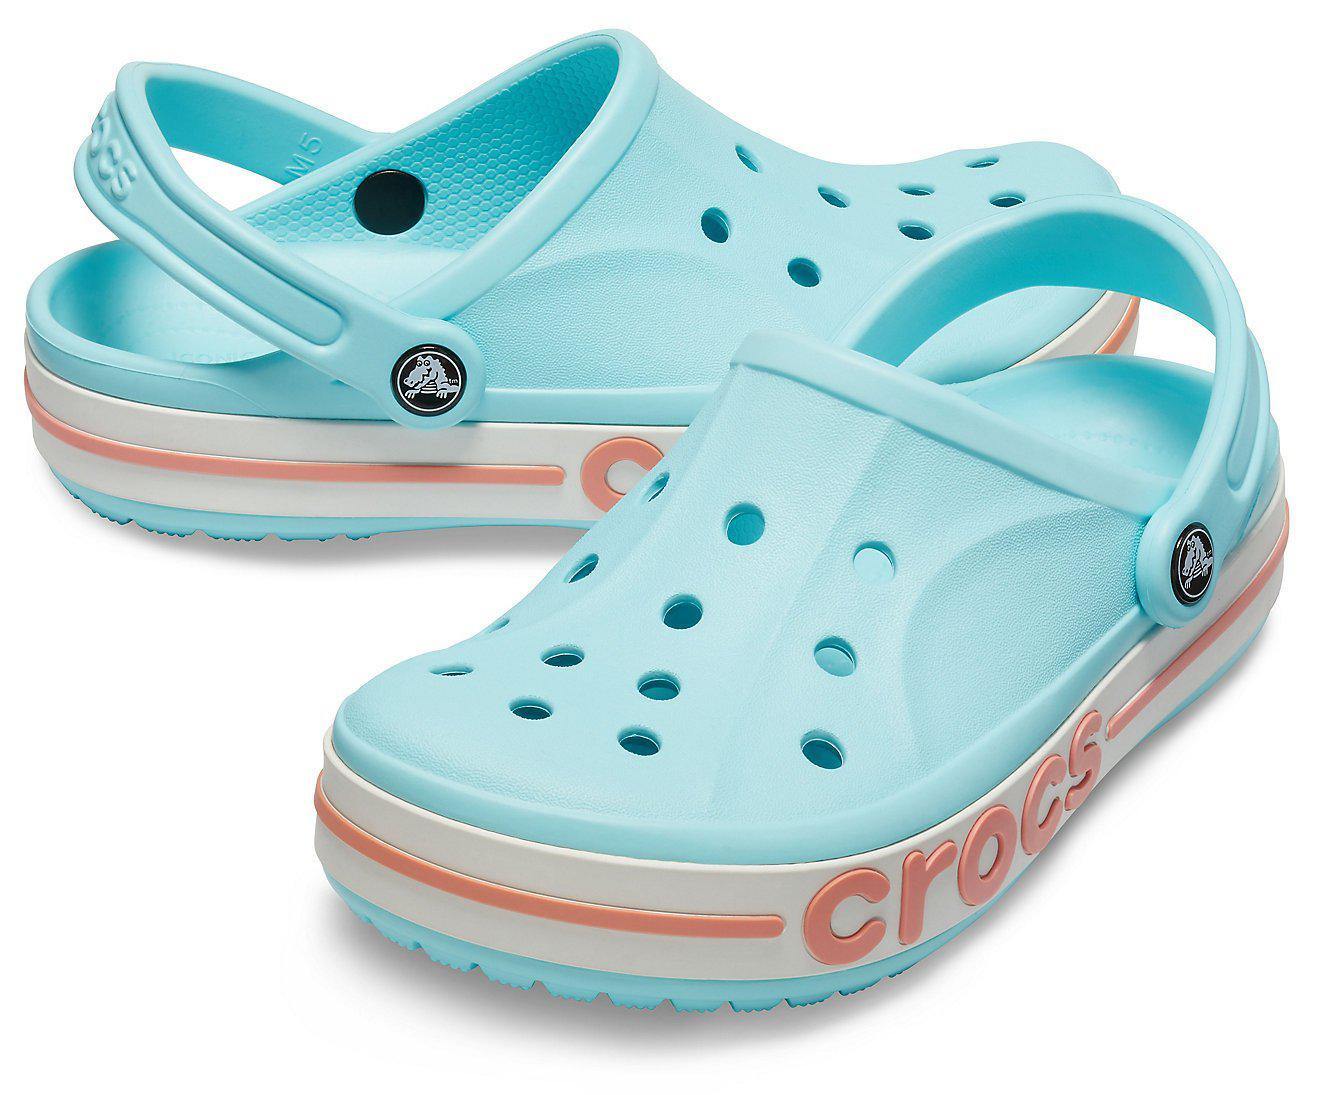 Authentic Crocs Bayaband Clog for Women – mTravel Store